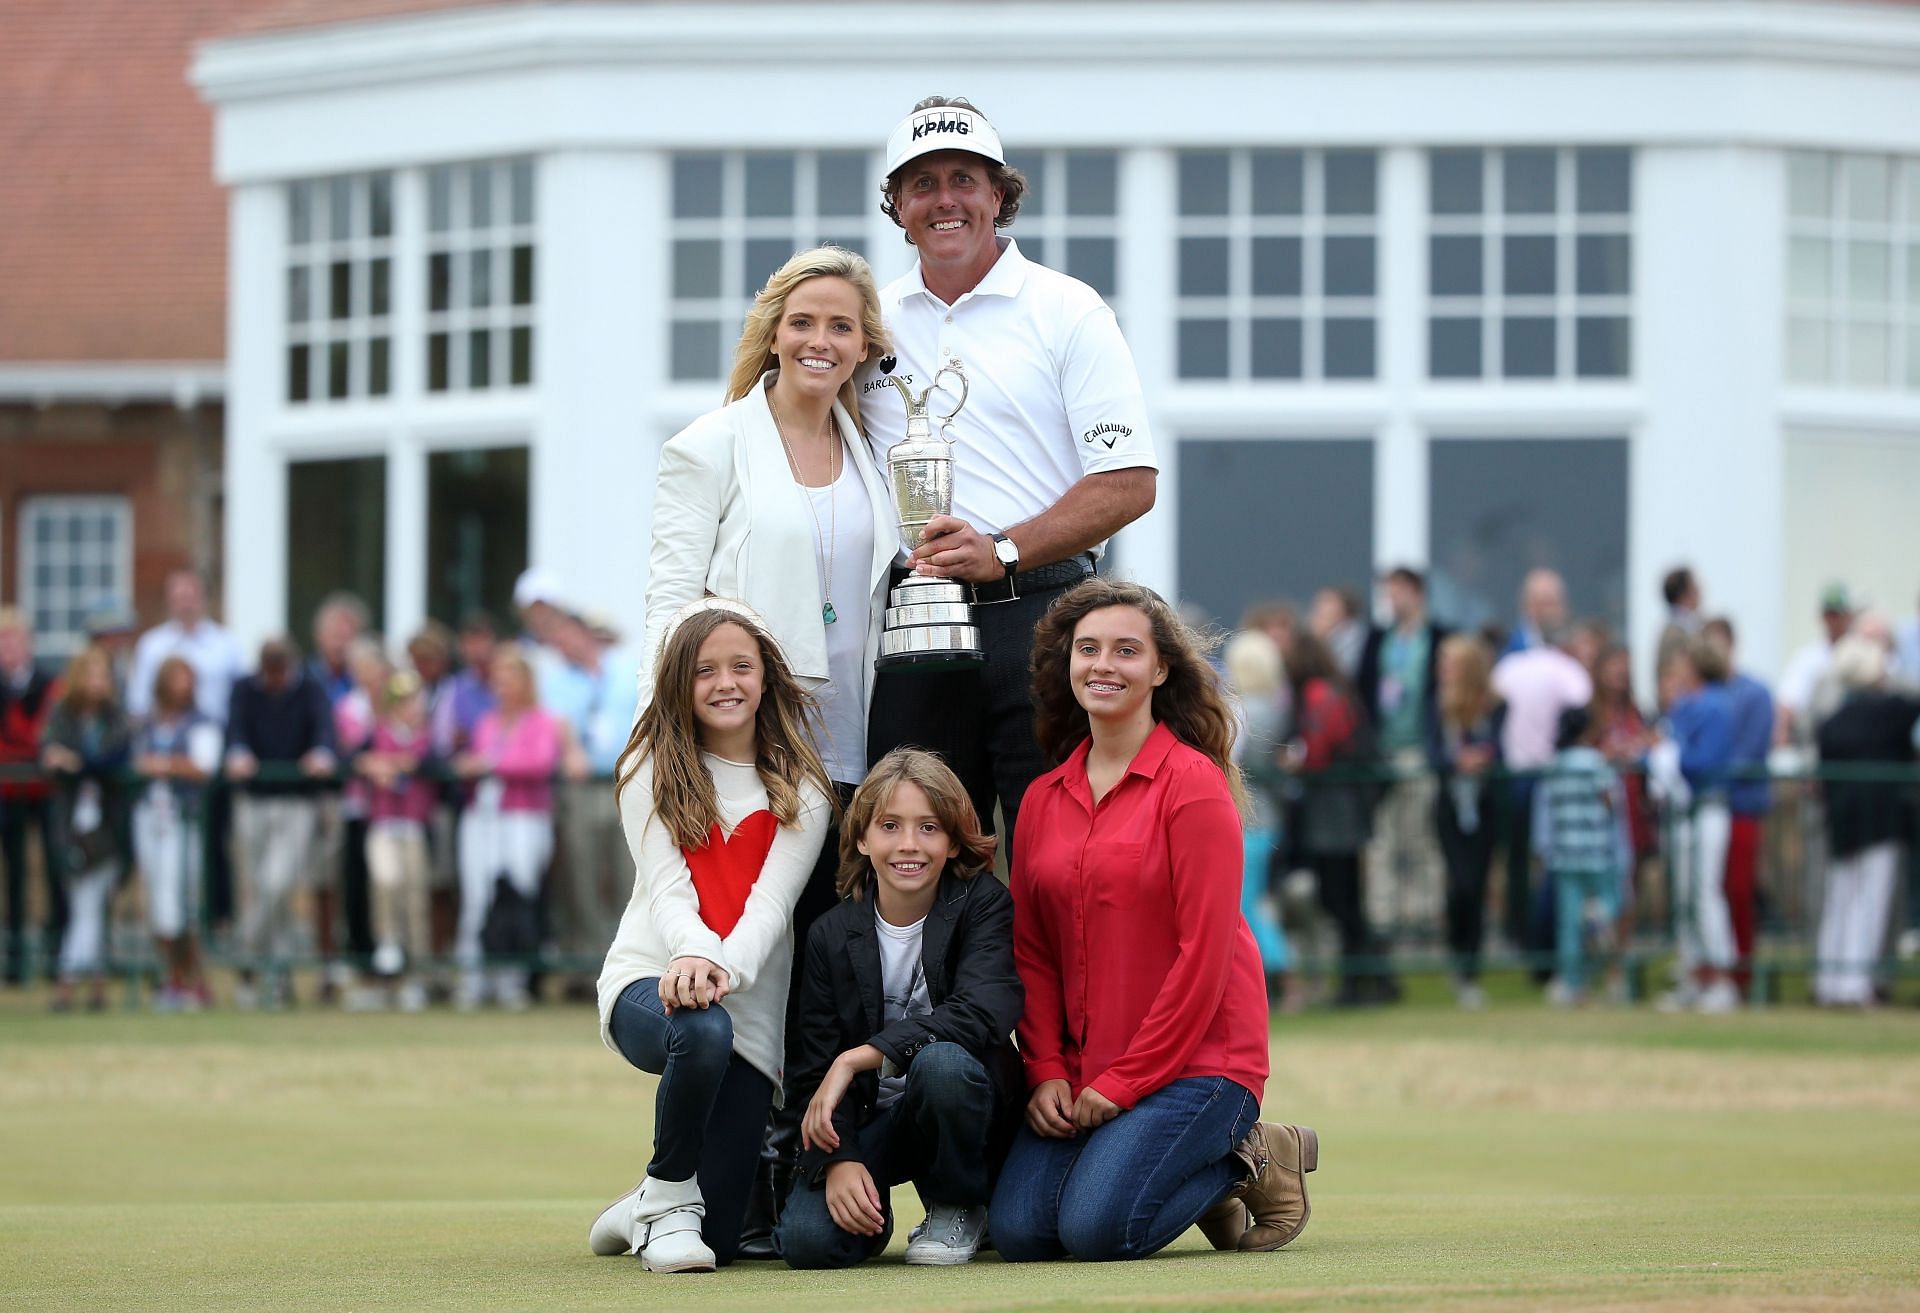 The Mickelsons, 142nd Open Championship (Image via Getty)